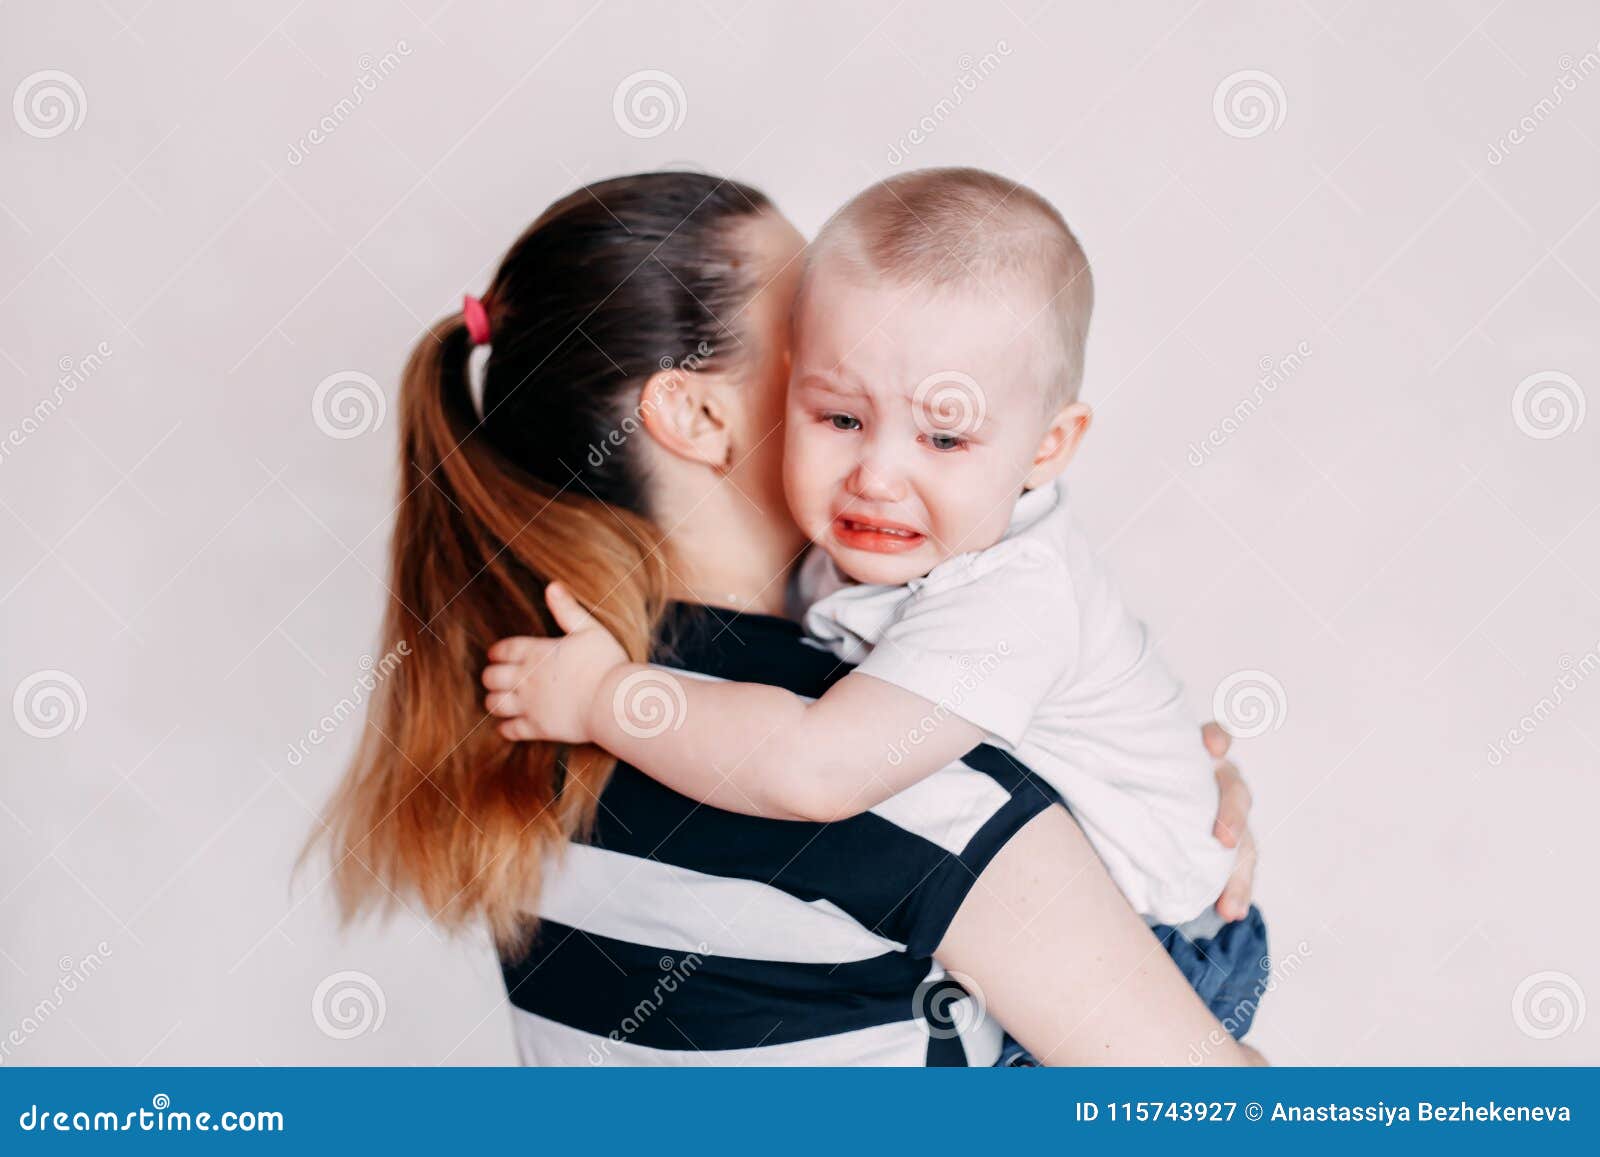 Crying Toddler Girl Being Consoled by Her Mother Stock Image ...